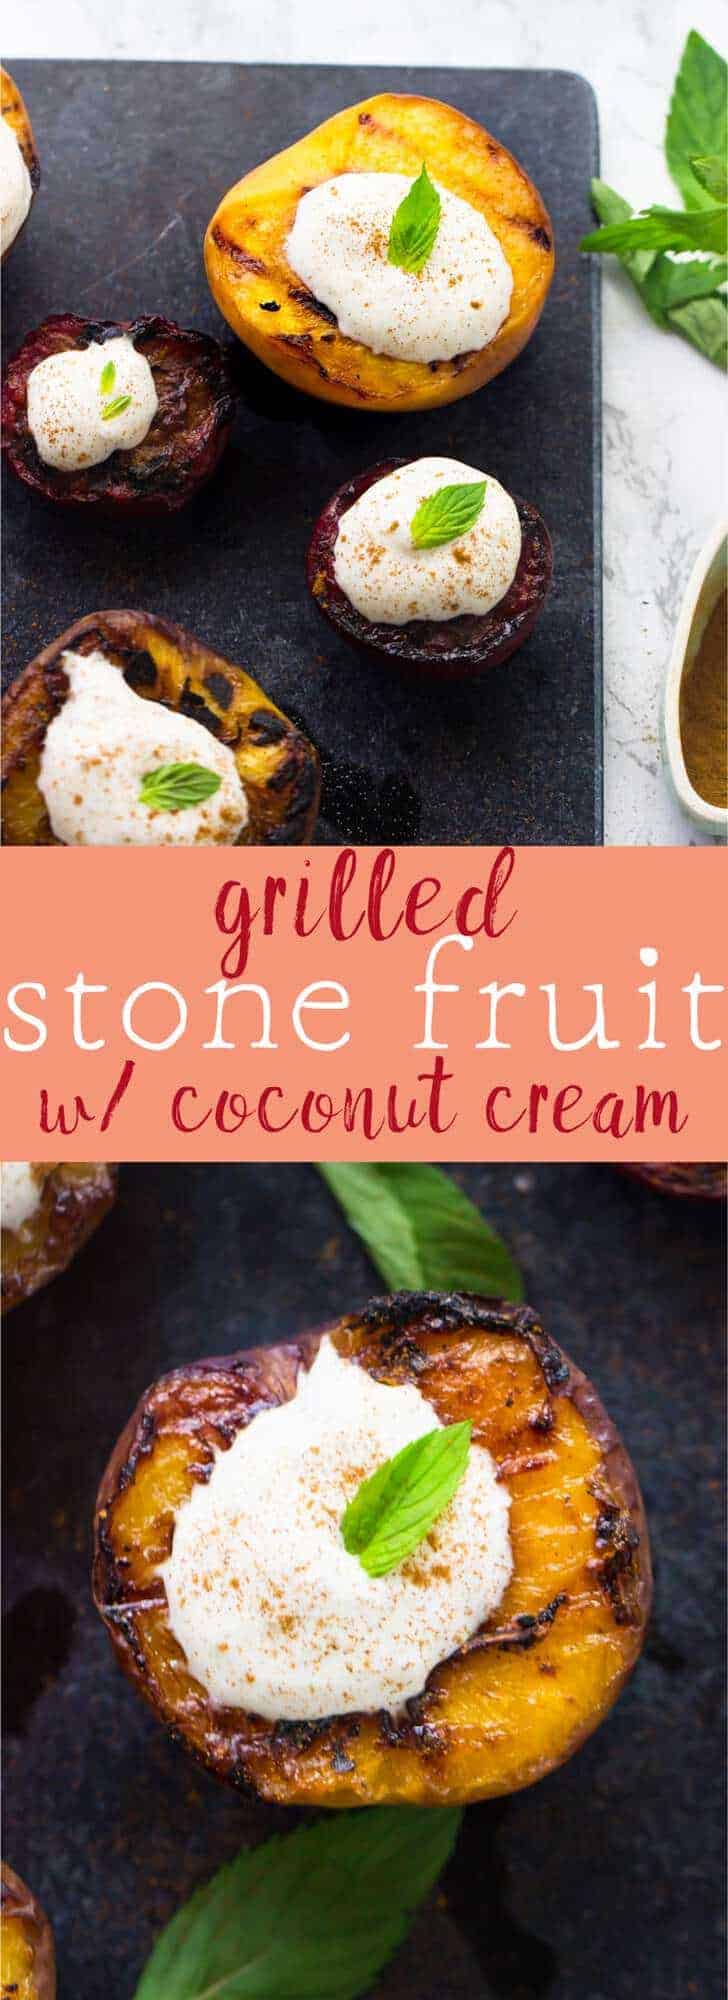 This Grilled Stone Fruit makes a delicious and fresh summer dessert! It's served with a sweet homemade coconut cream in just 15 minutes! via https://jessicainthekitchen.com